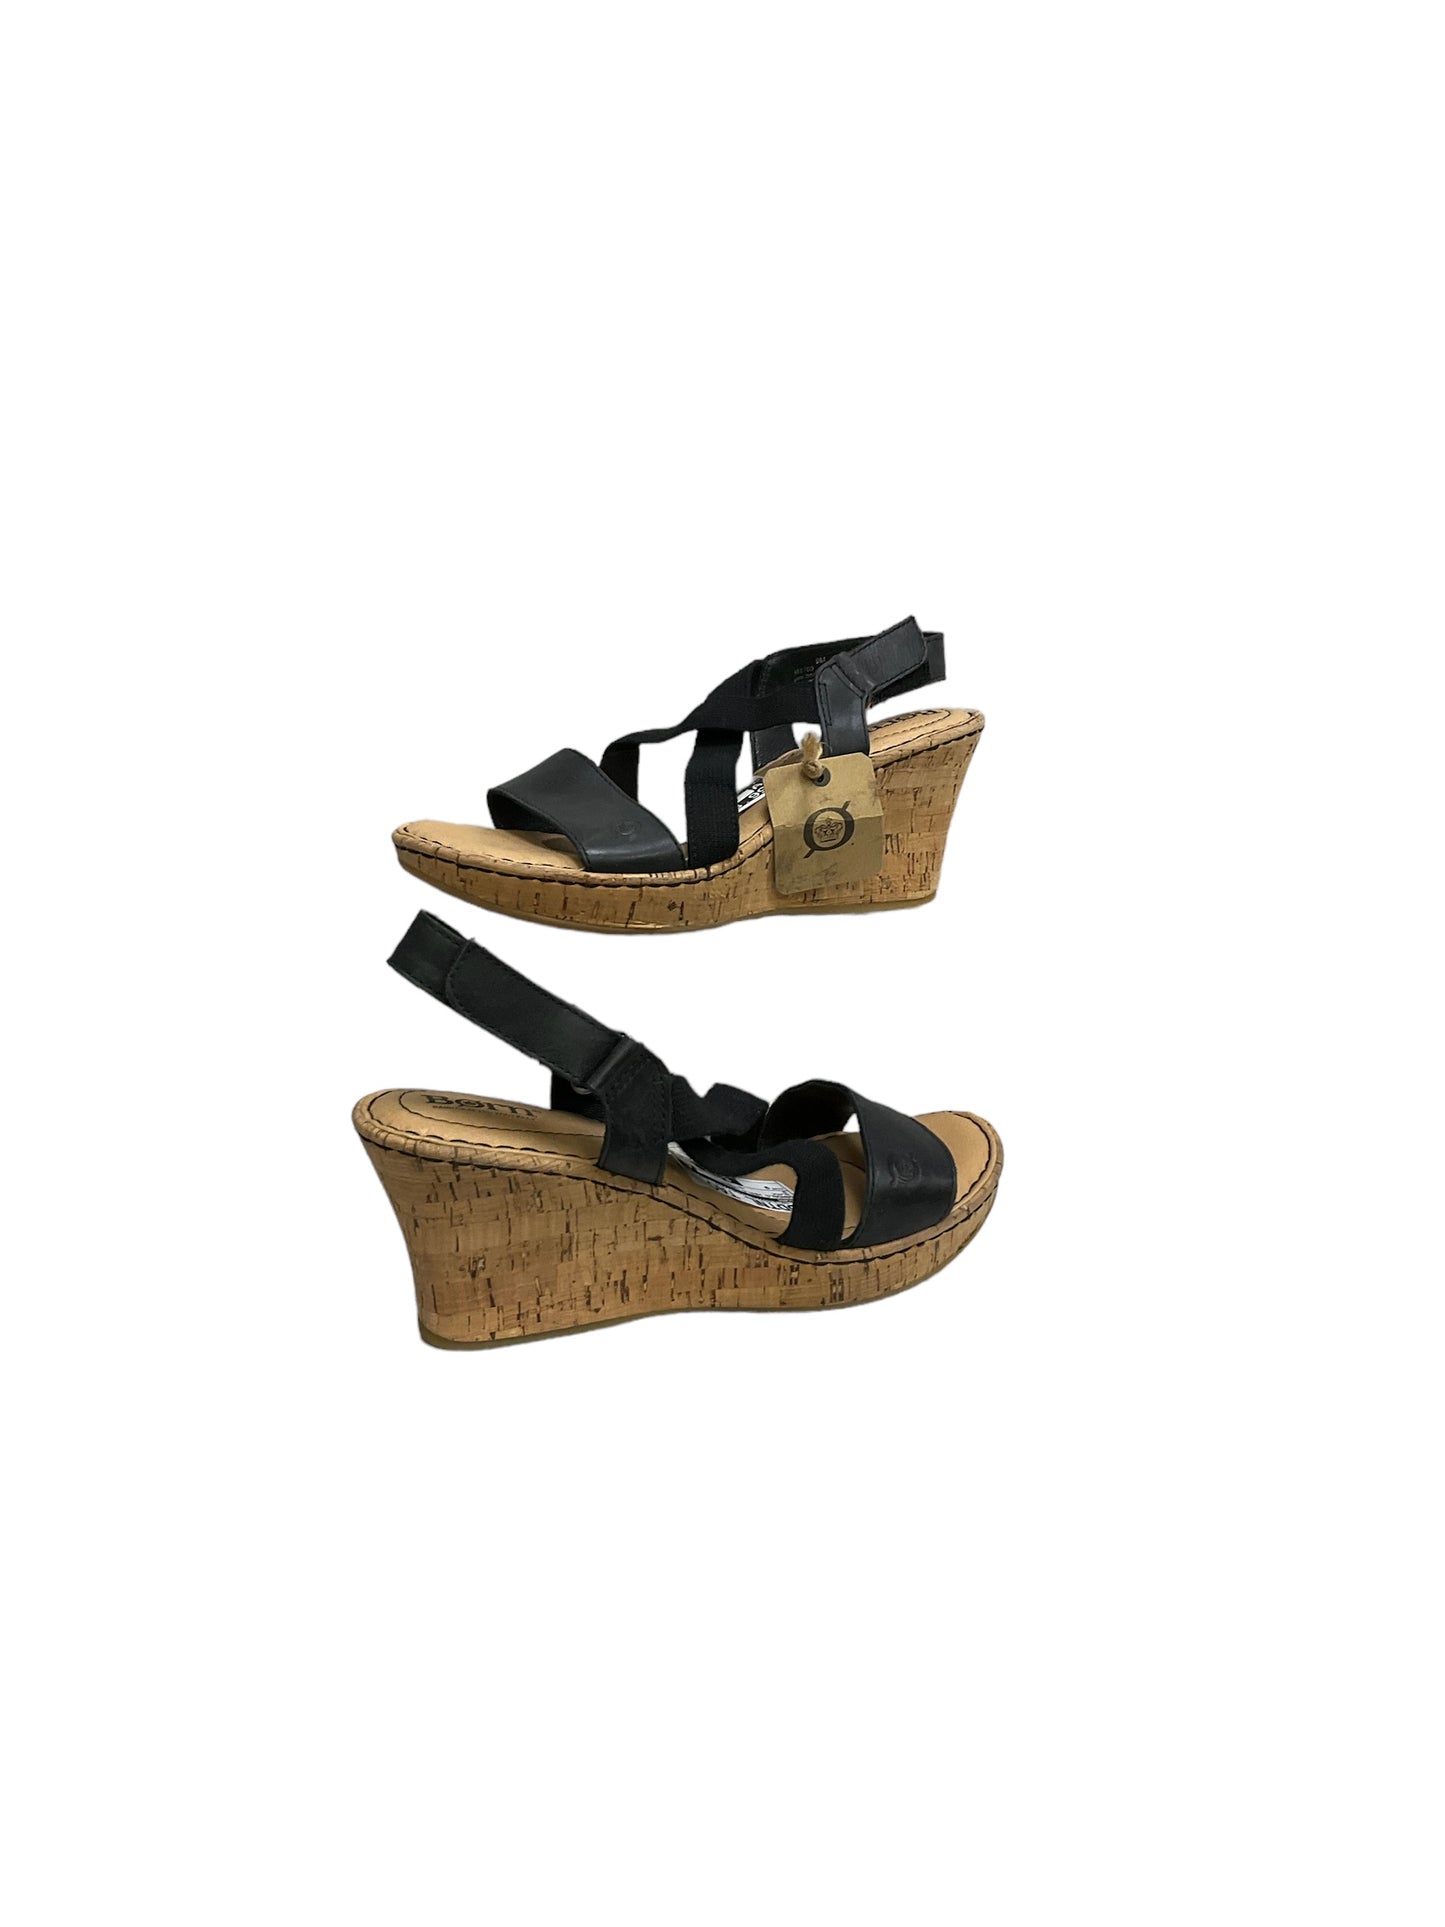 Sandals Heels Wedge By Born  Size: 9